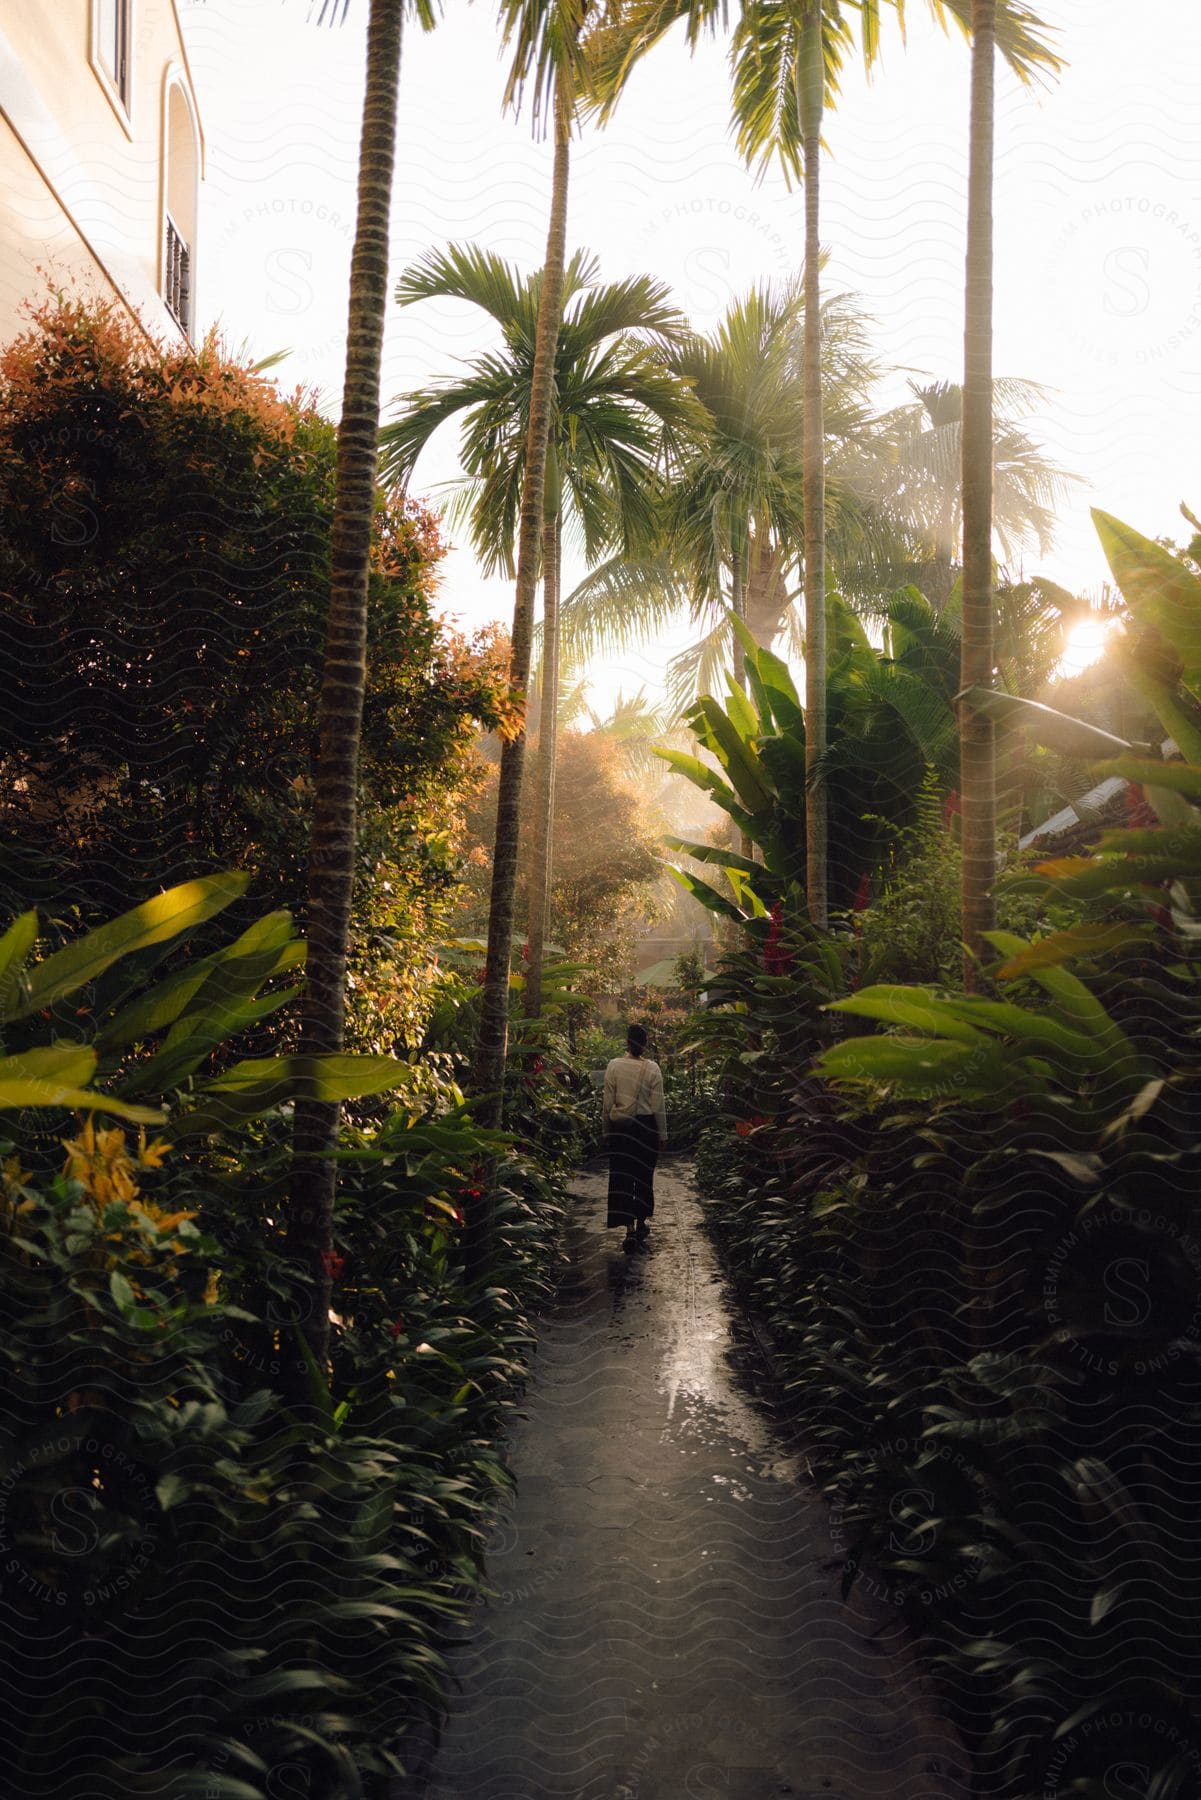 Woman with her back walking on a narrow sidewalk with tropical vegetation around her